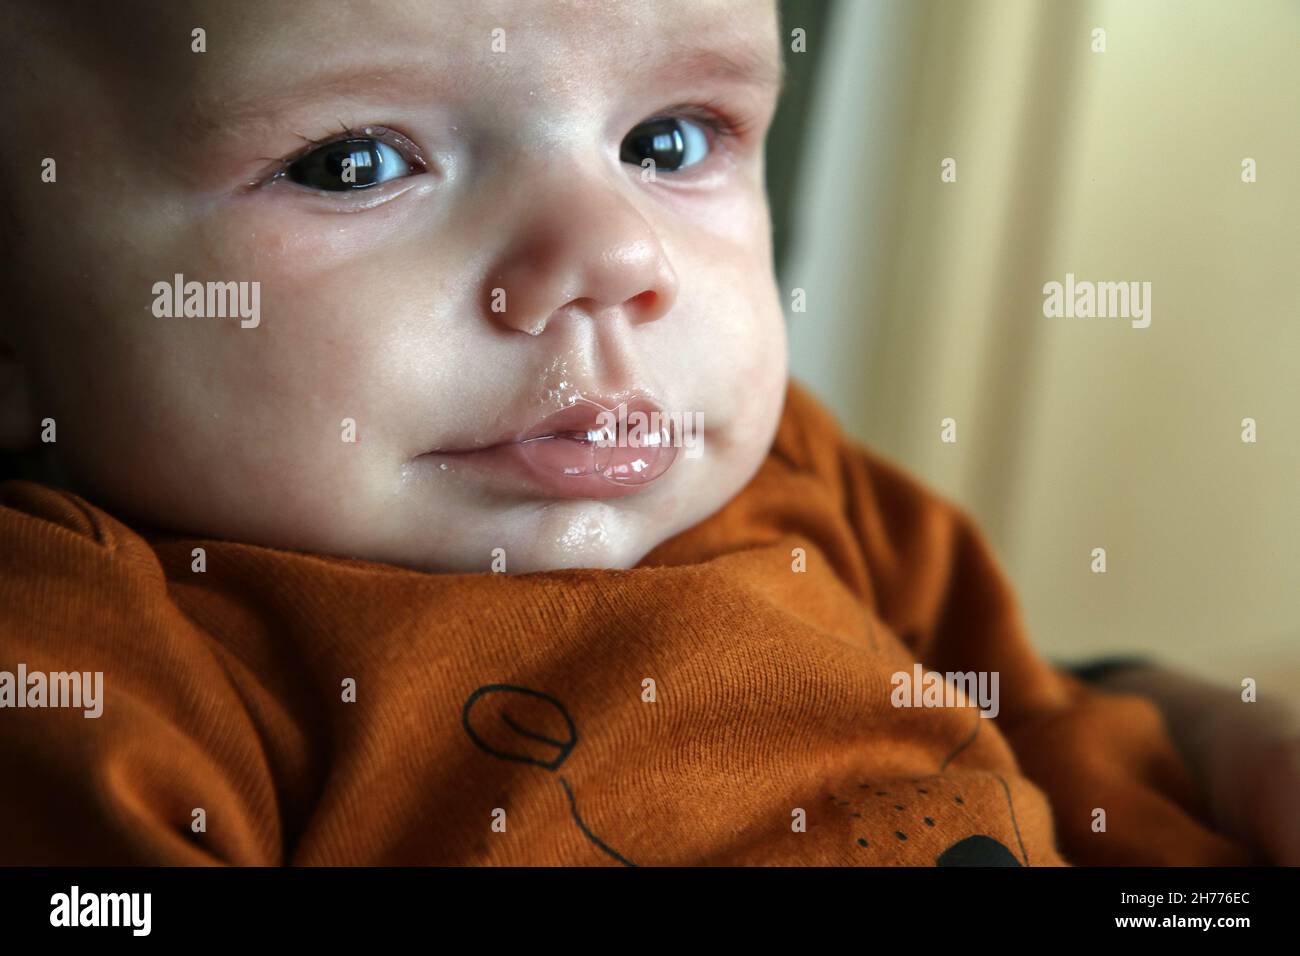 The detail of the baby having foam from the slaver on its mouth. Looking unhappy and absorbed in thoughts. Stock Photo